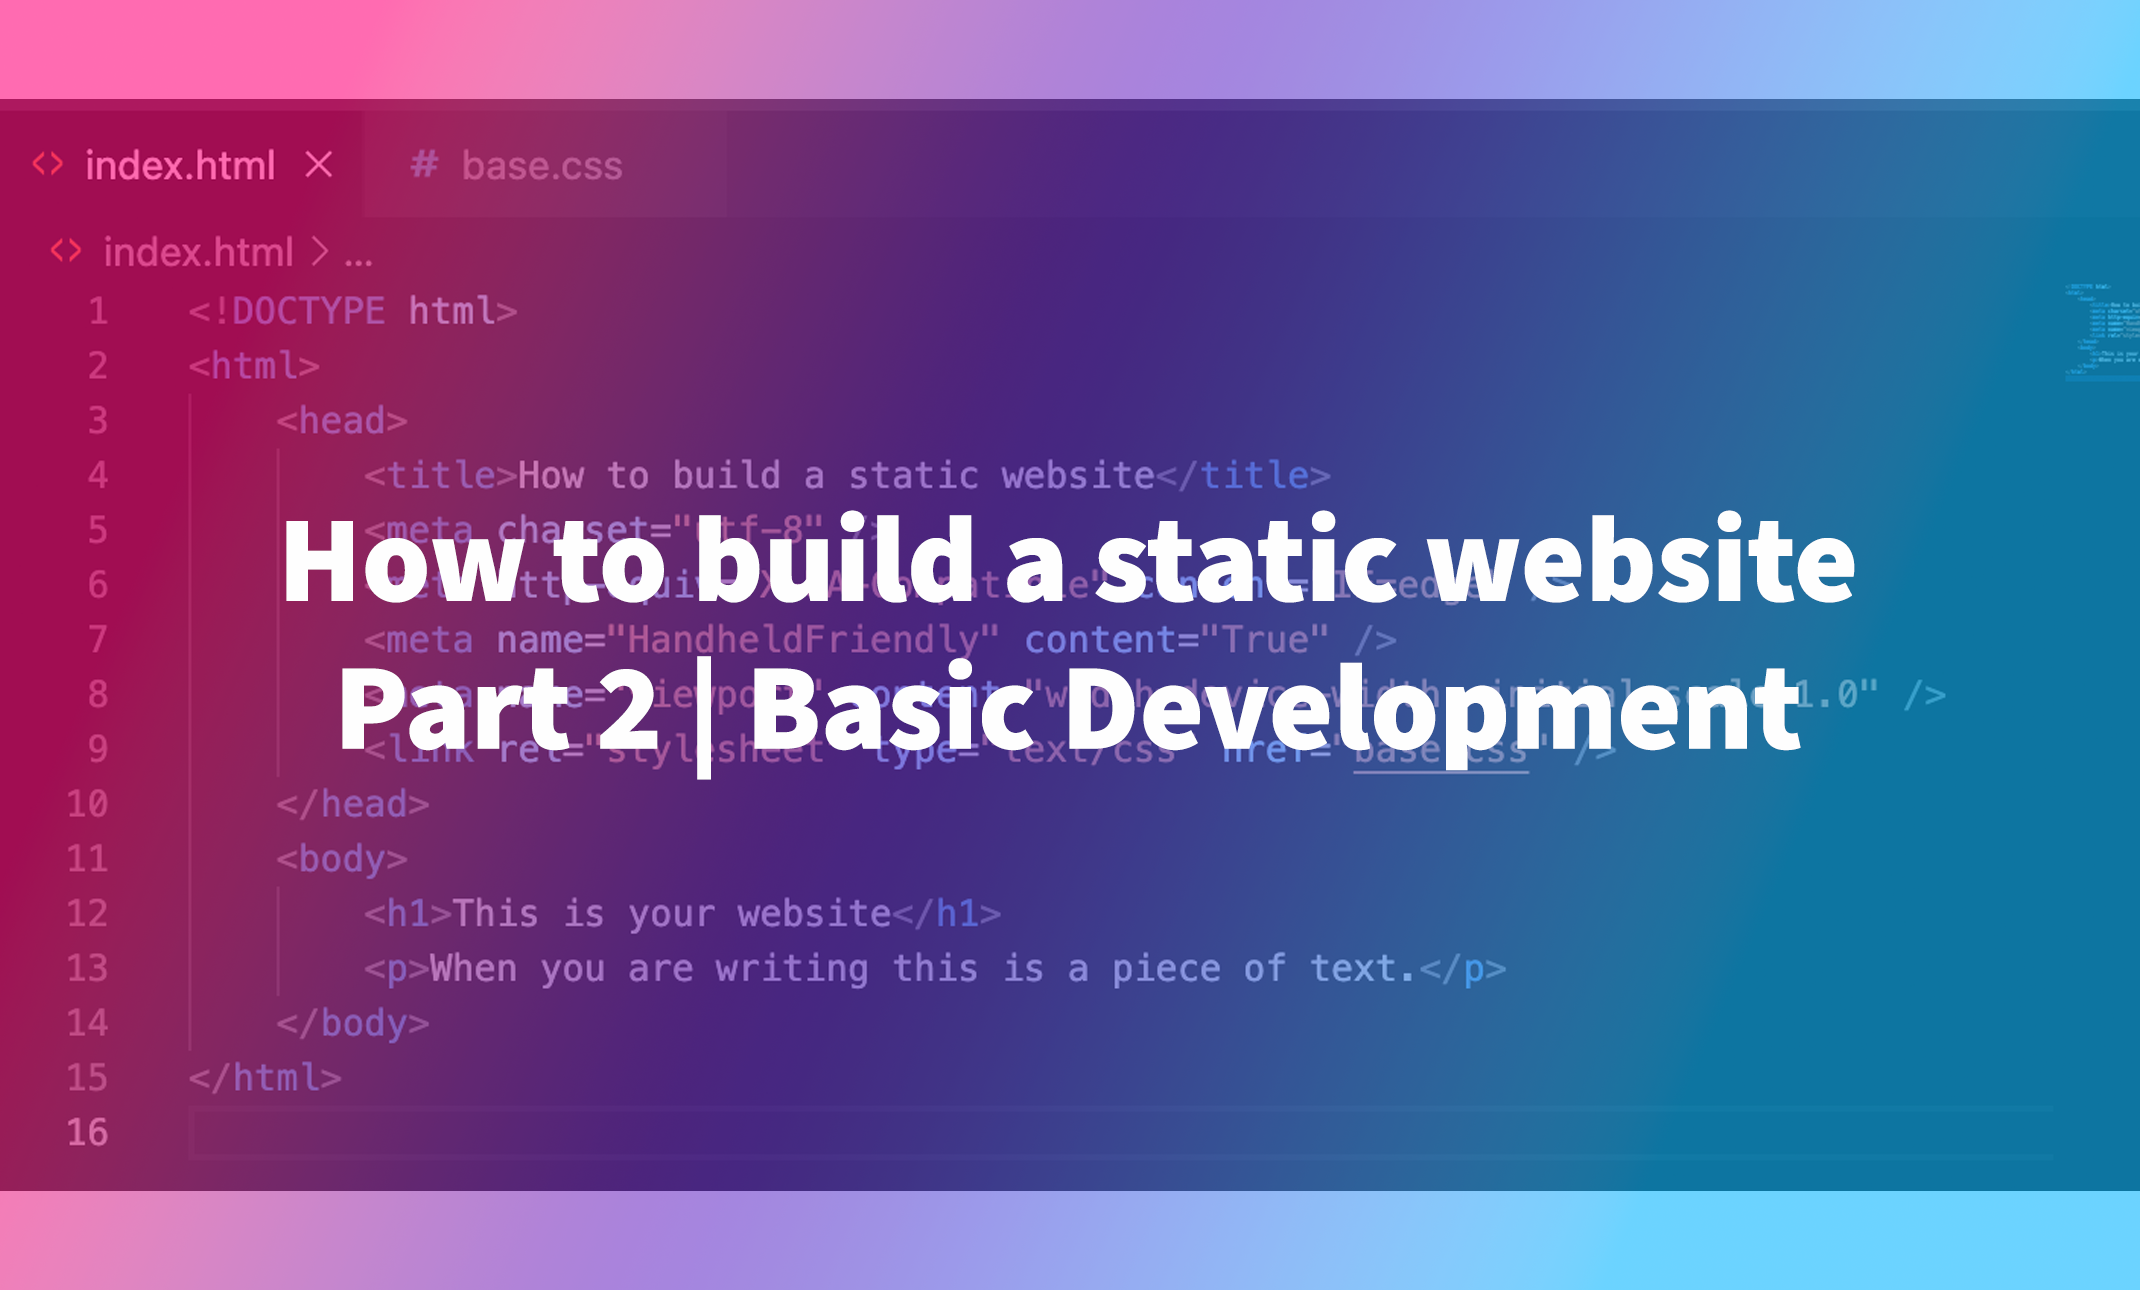 How to build a static website - Part 2 | Basic Development